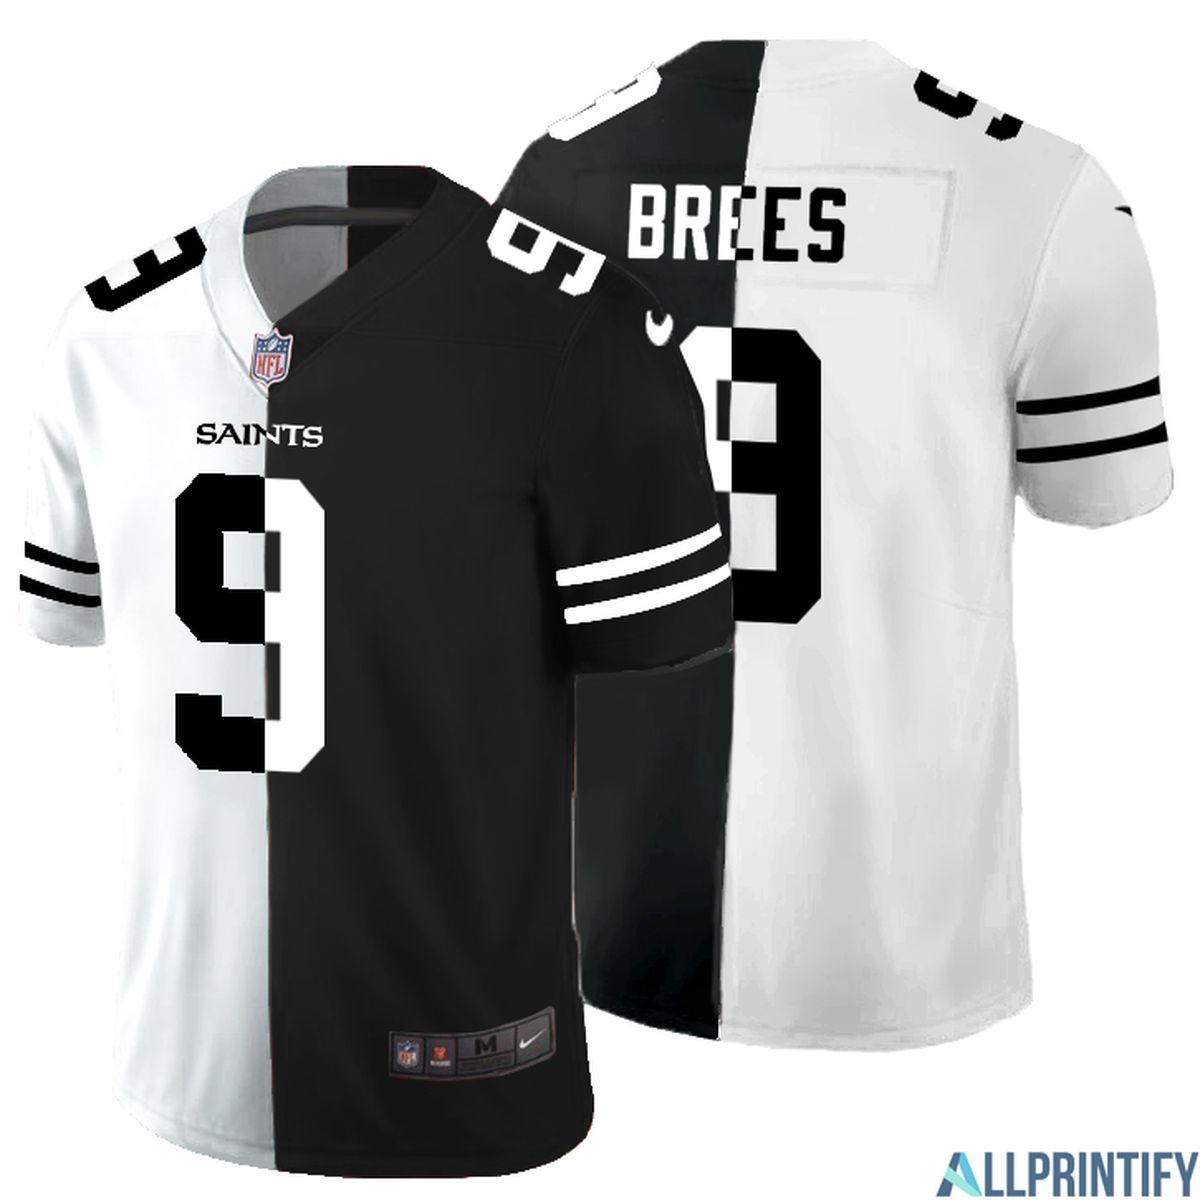 Drew Brees New Orleans Saints 9 Black And White Vapor Limited Jersey